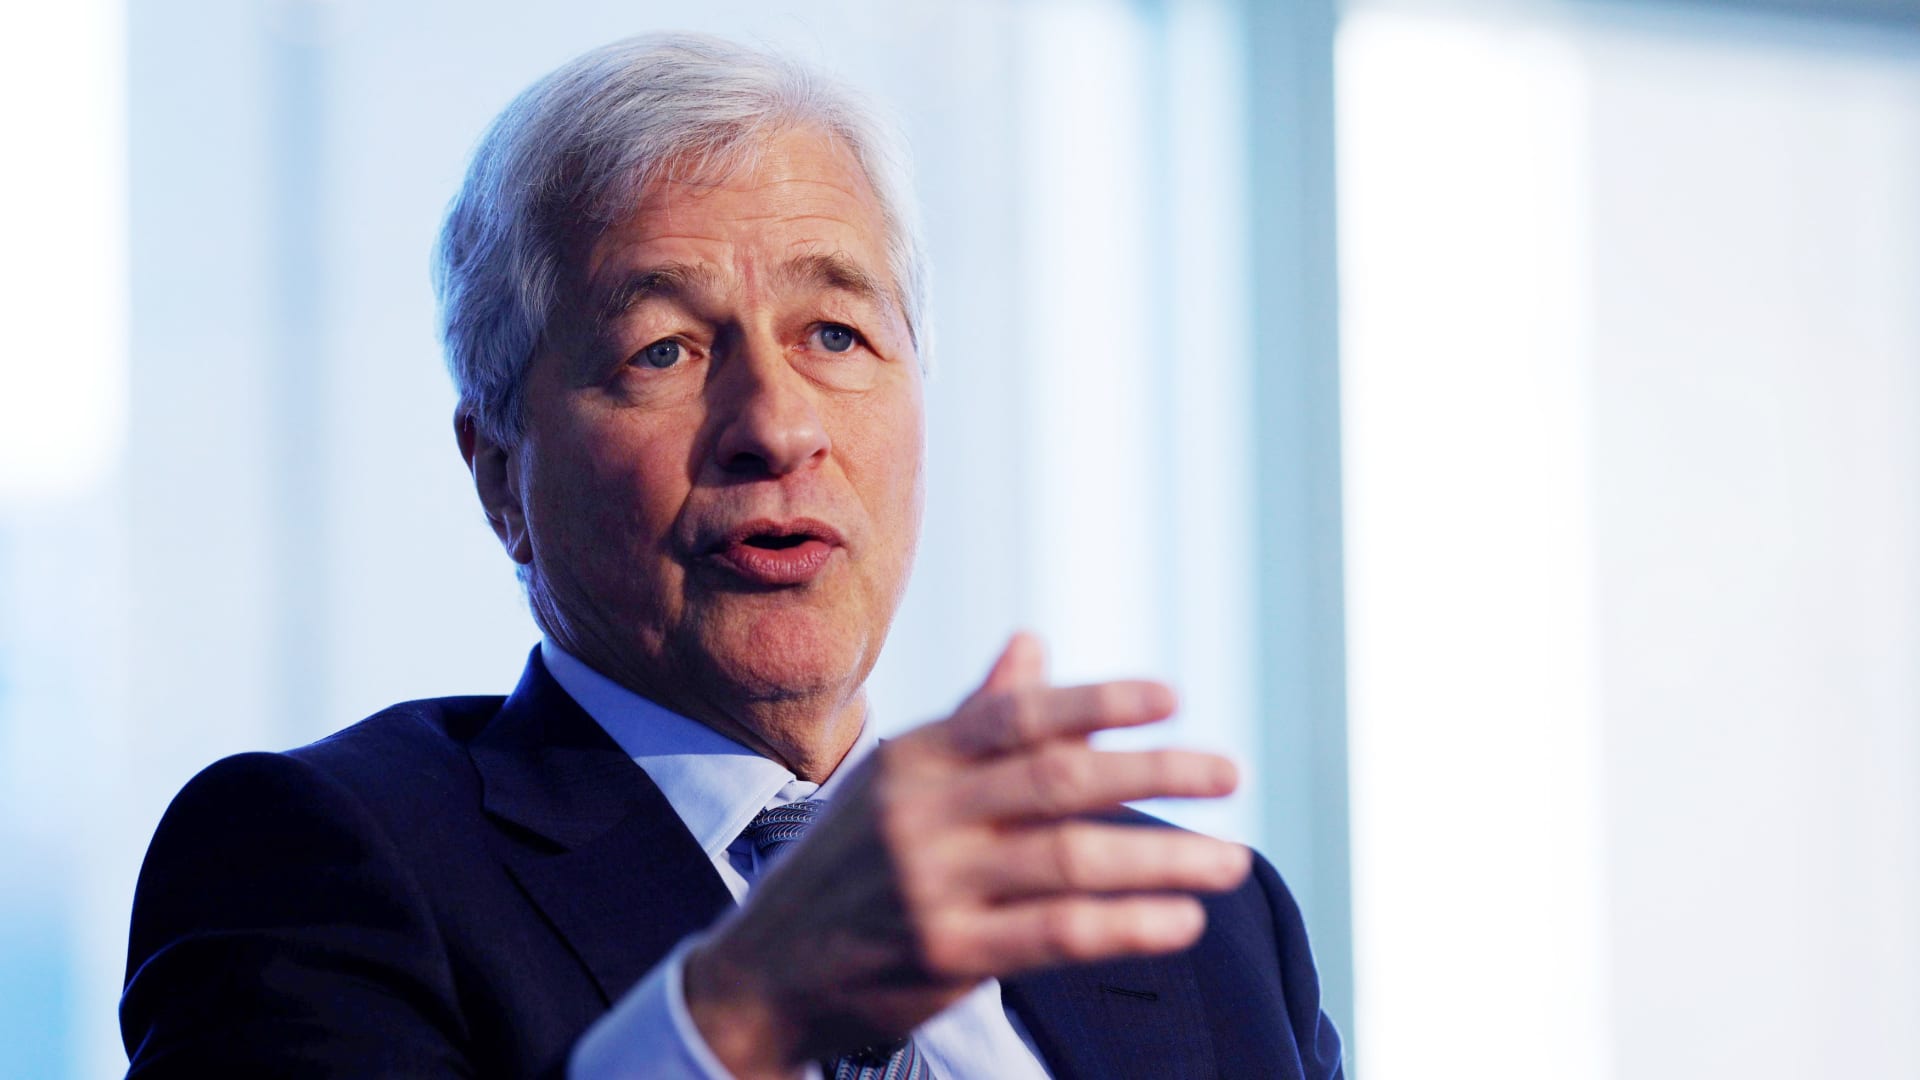 Jamie Dimon says Musk should 'clean up Twitter,' echoes bot concerns